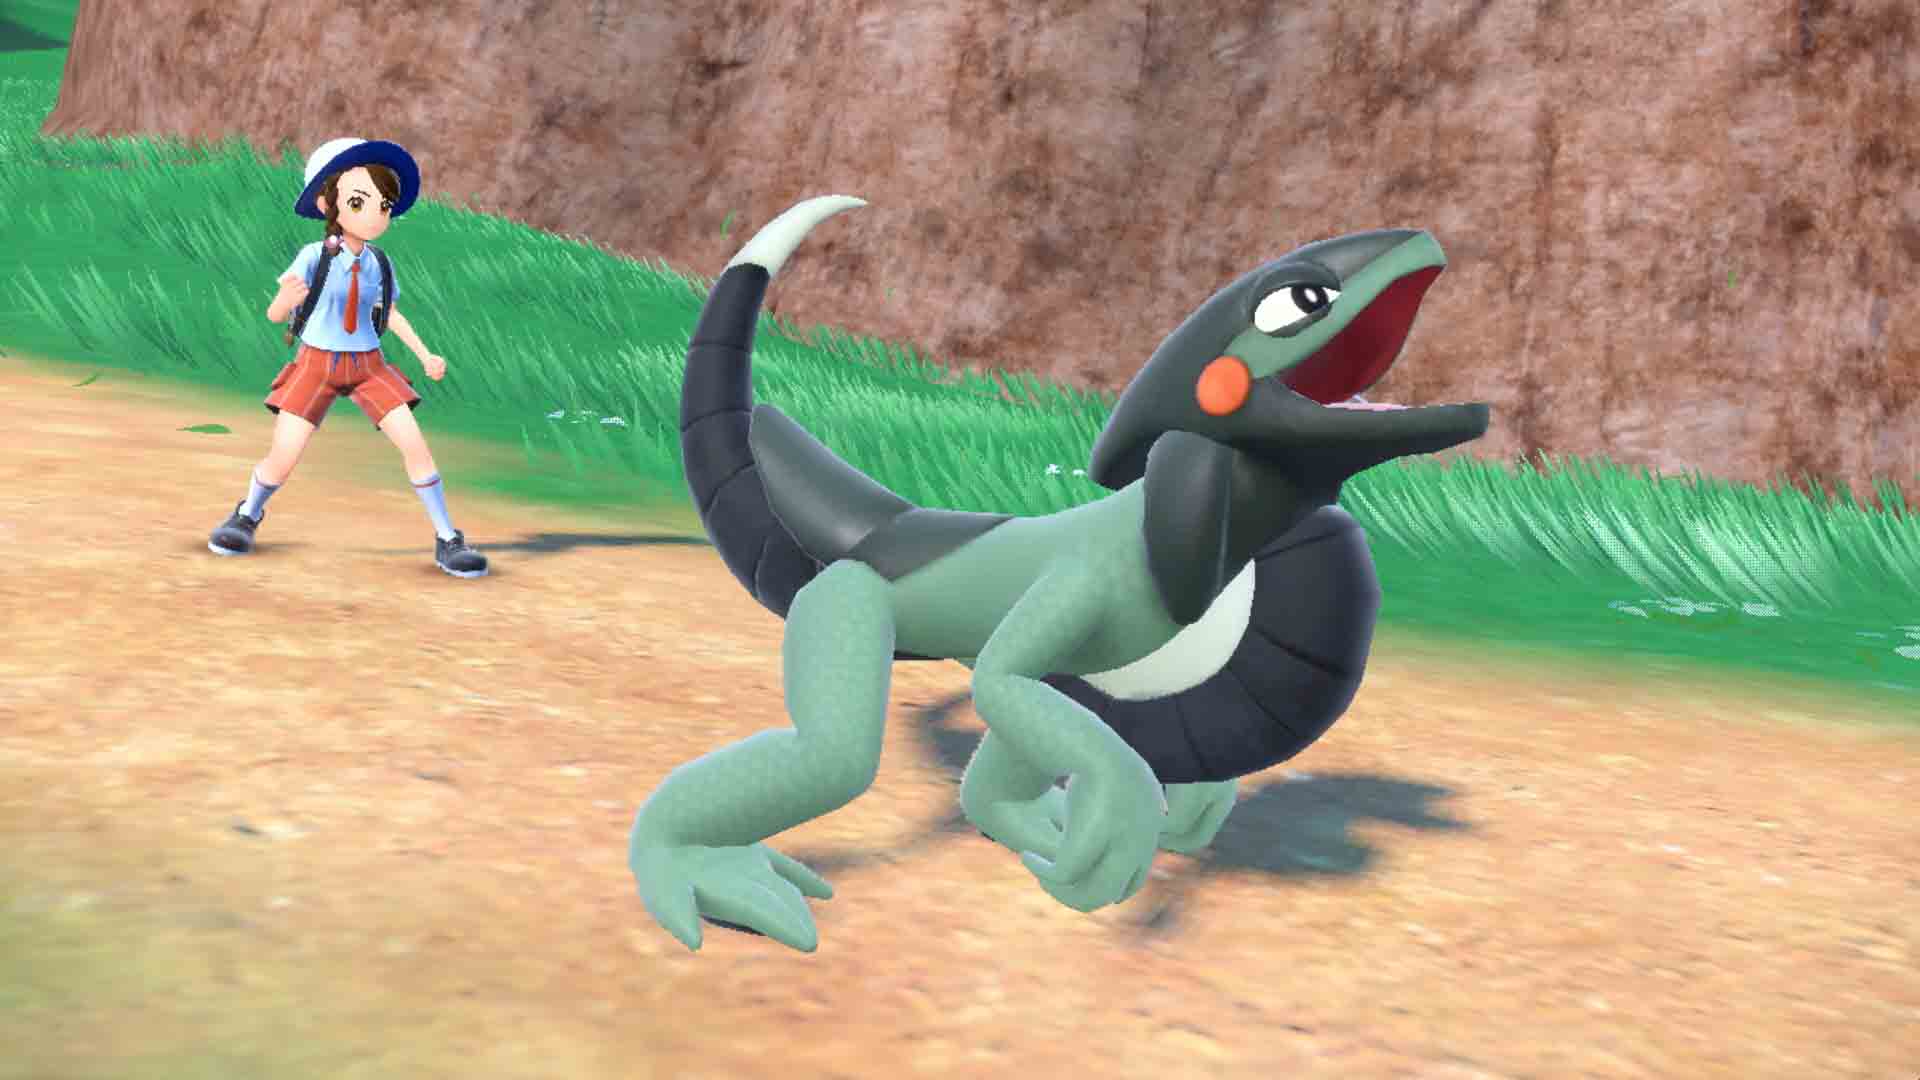 A new Pokemon Scarlet and Violet trailer drops tomorrow